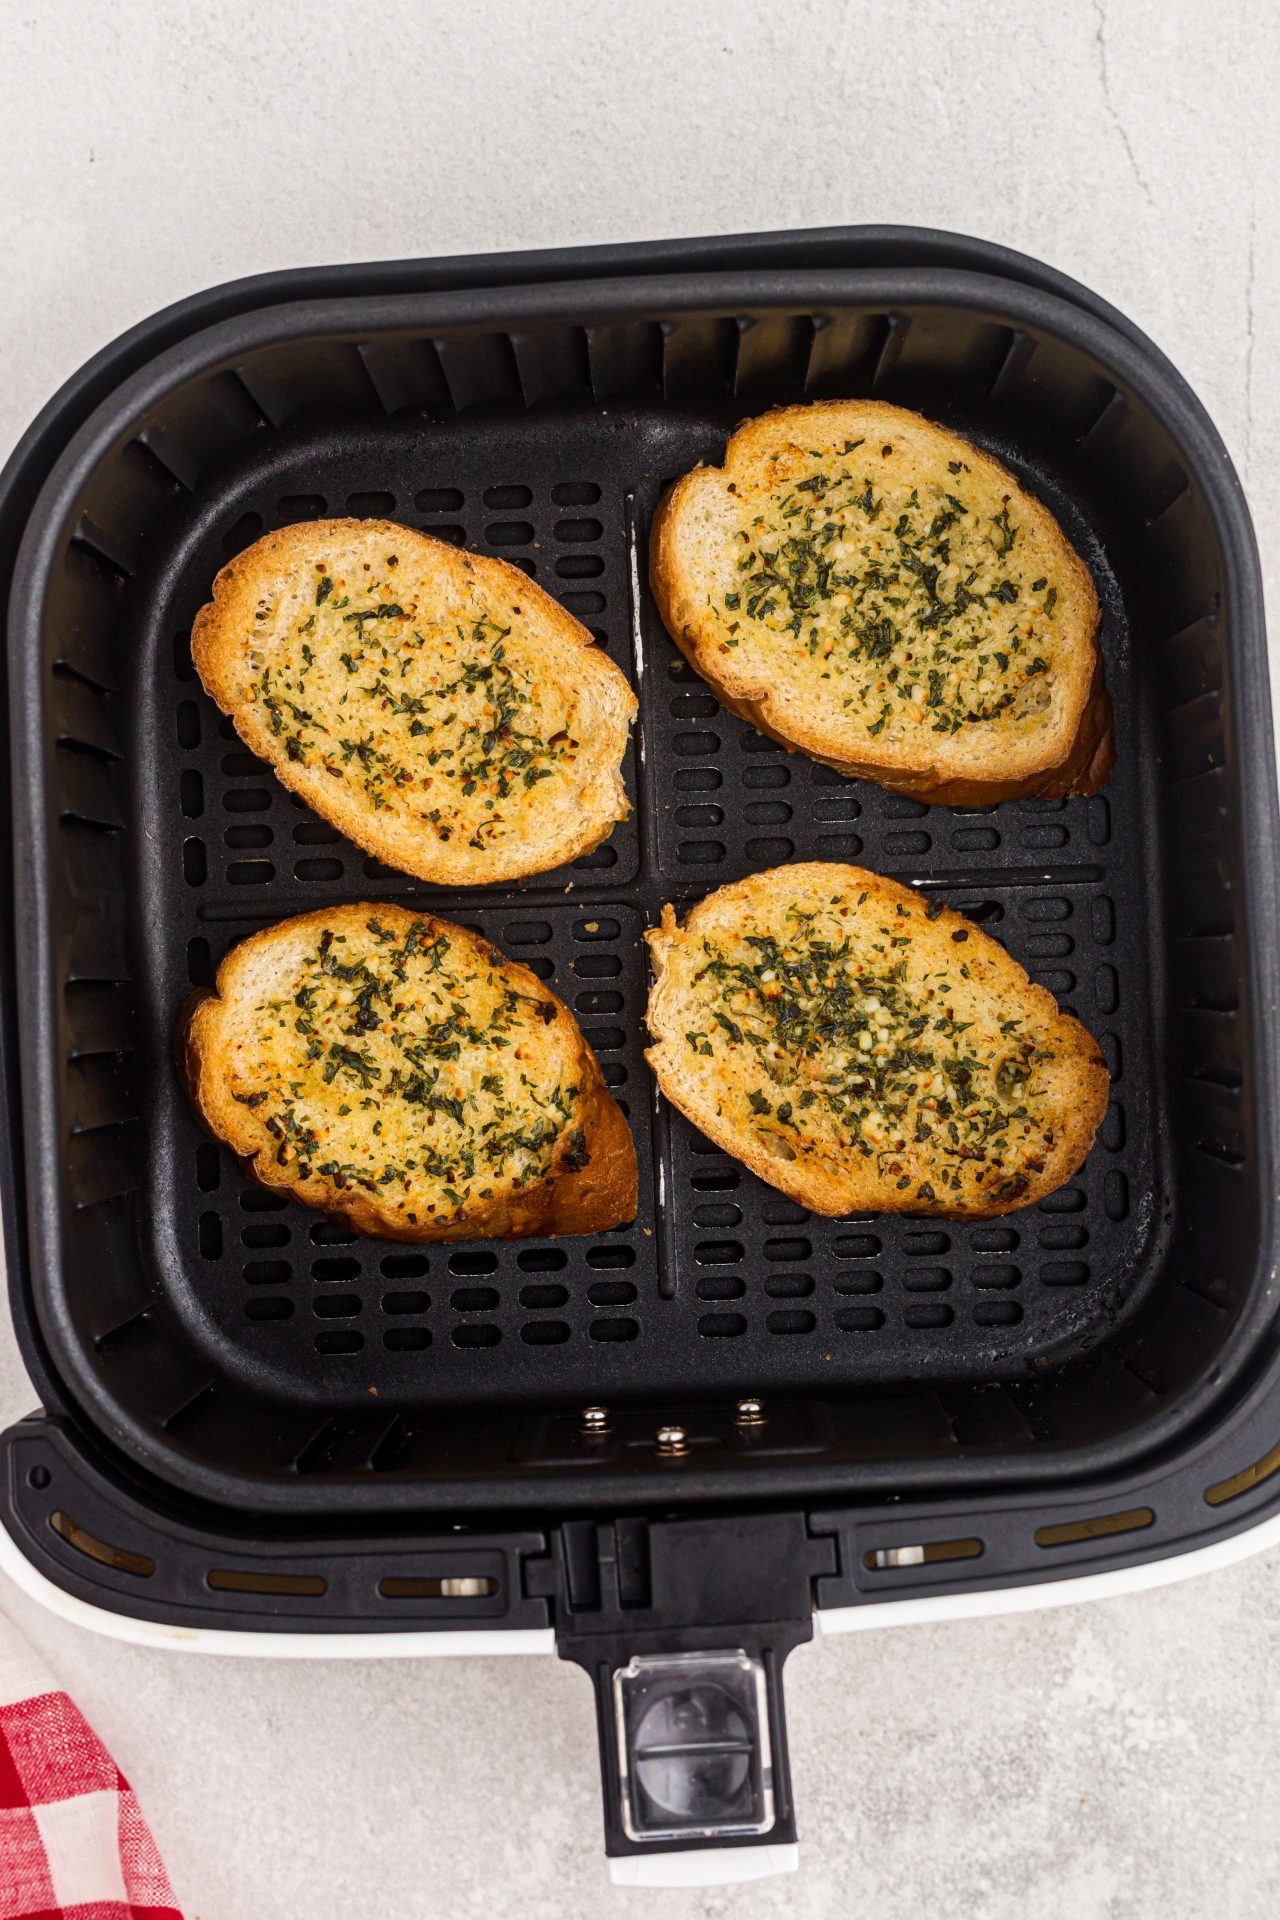 Golden toasted garlic bread slices in the air fryer basket